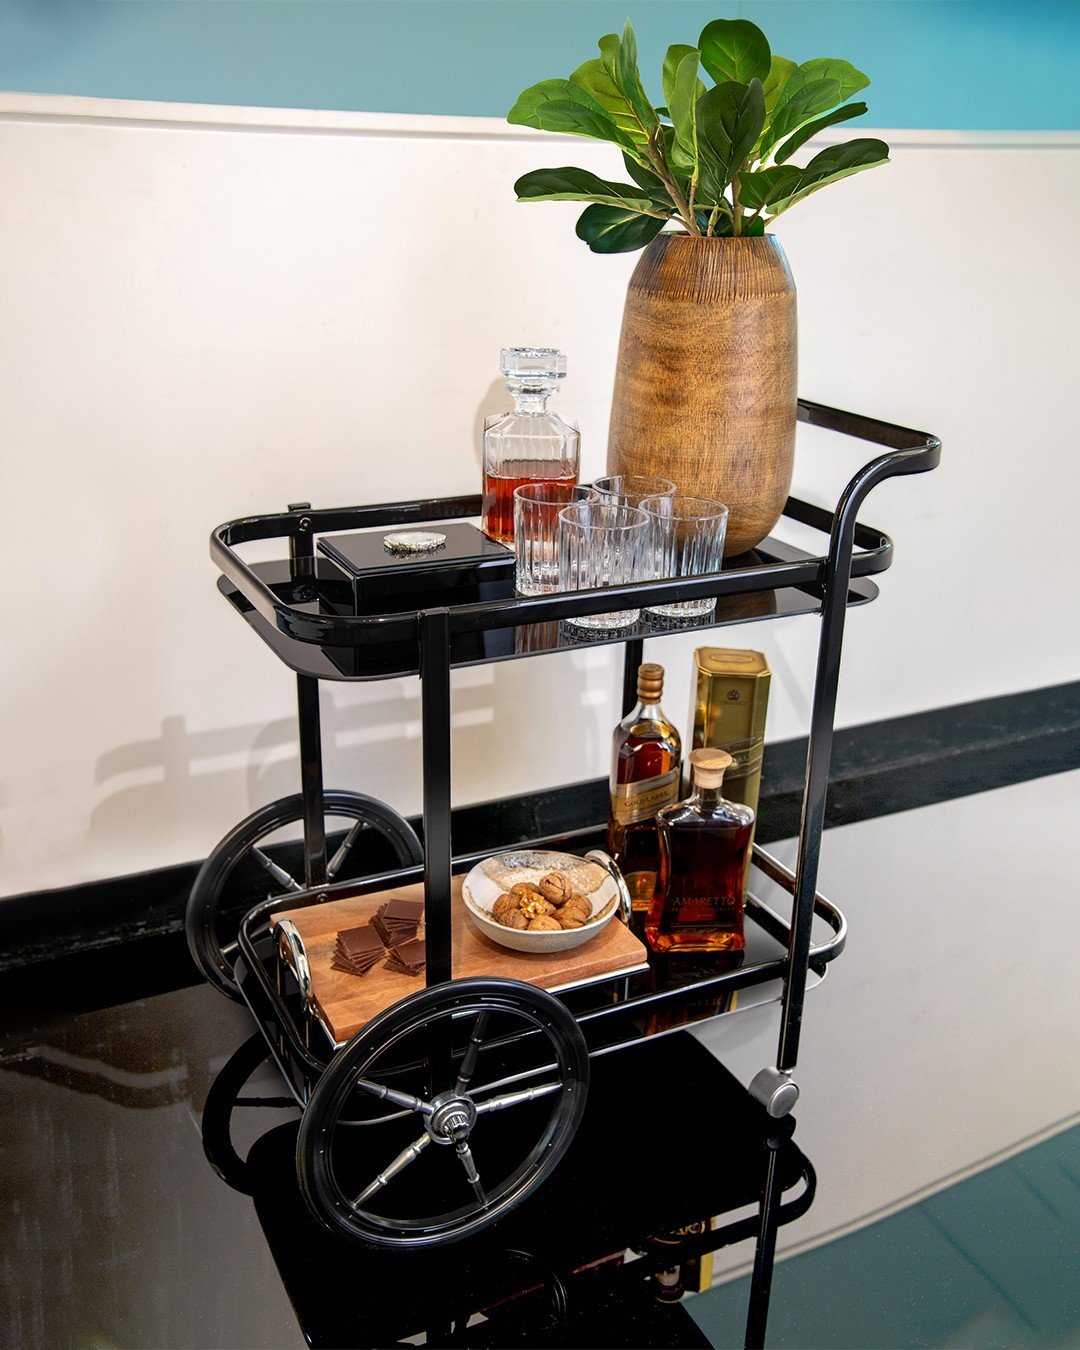 🥃 Sip in Style
🌟Your favourite Bar Carts are back in stock!

☎️Please contact your sales representative to make an appointment to visit our showroom or shop online today. Limited stocks available.

@tandsagencies
@swinggifts_nsw
@montageagencies
@p